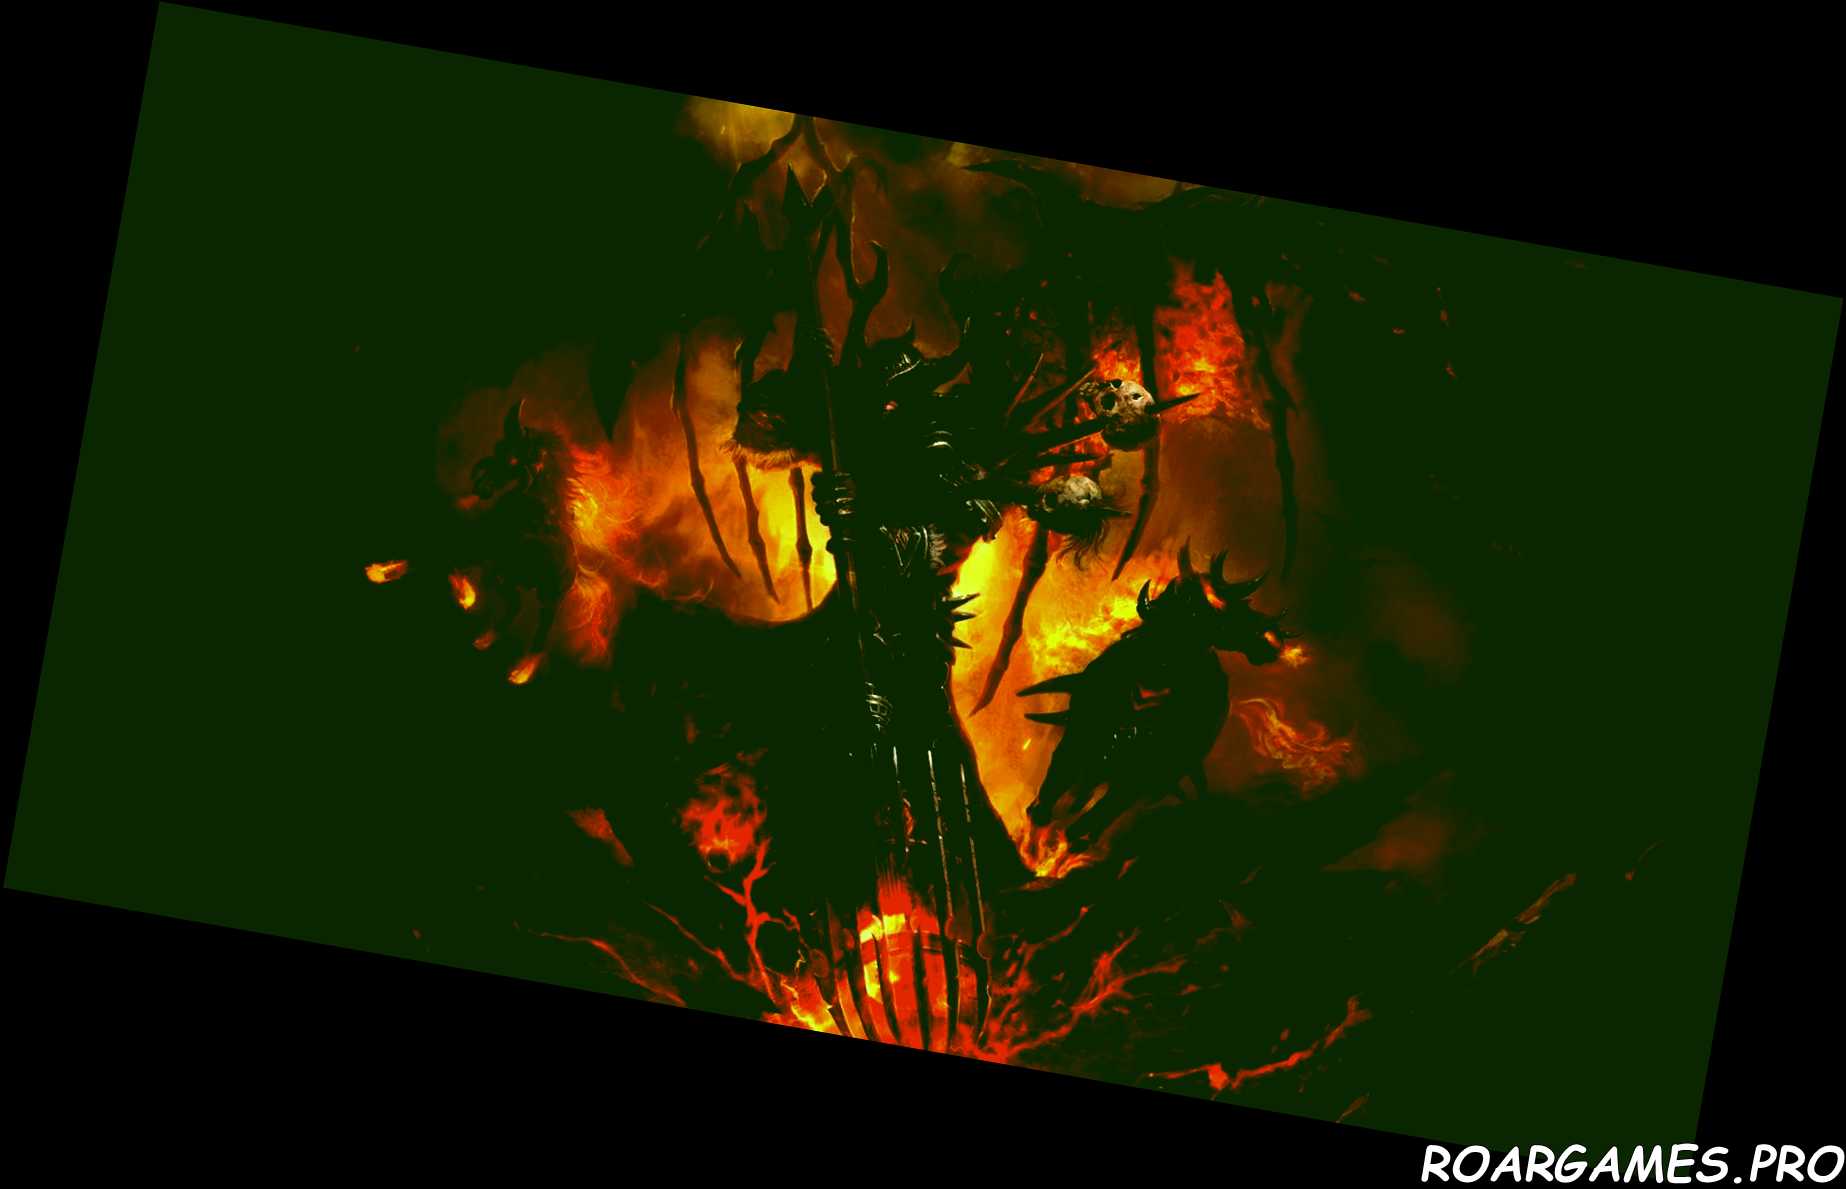 title devil wings flaming horses hell Cropped